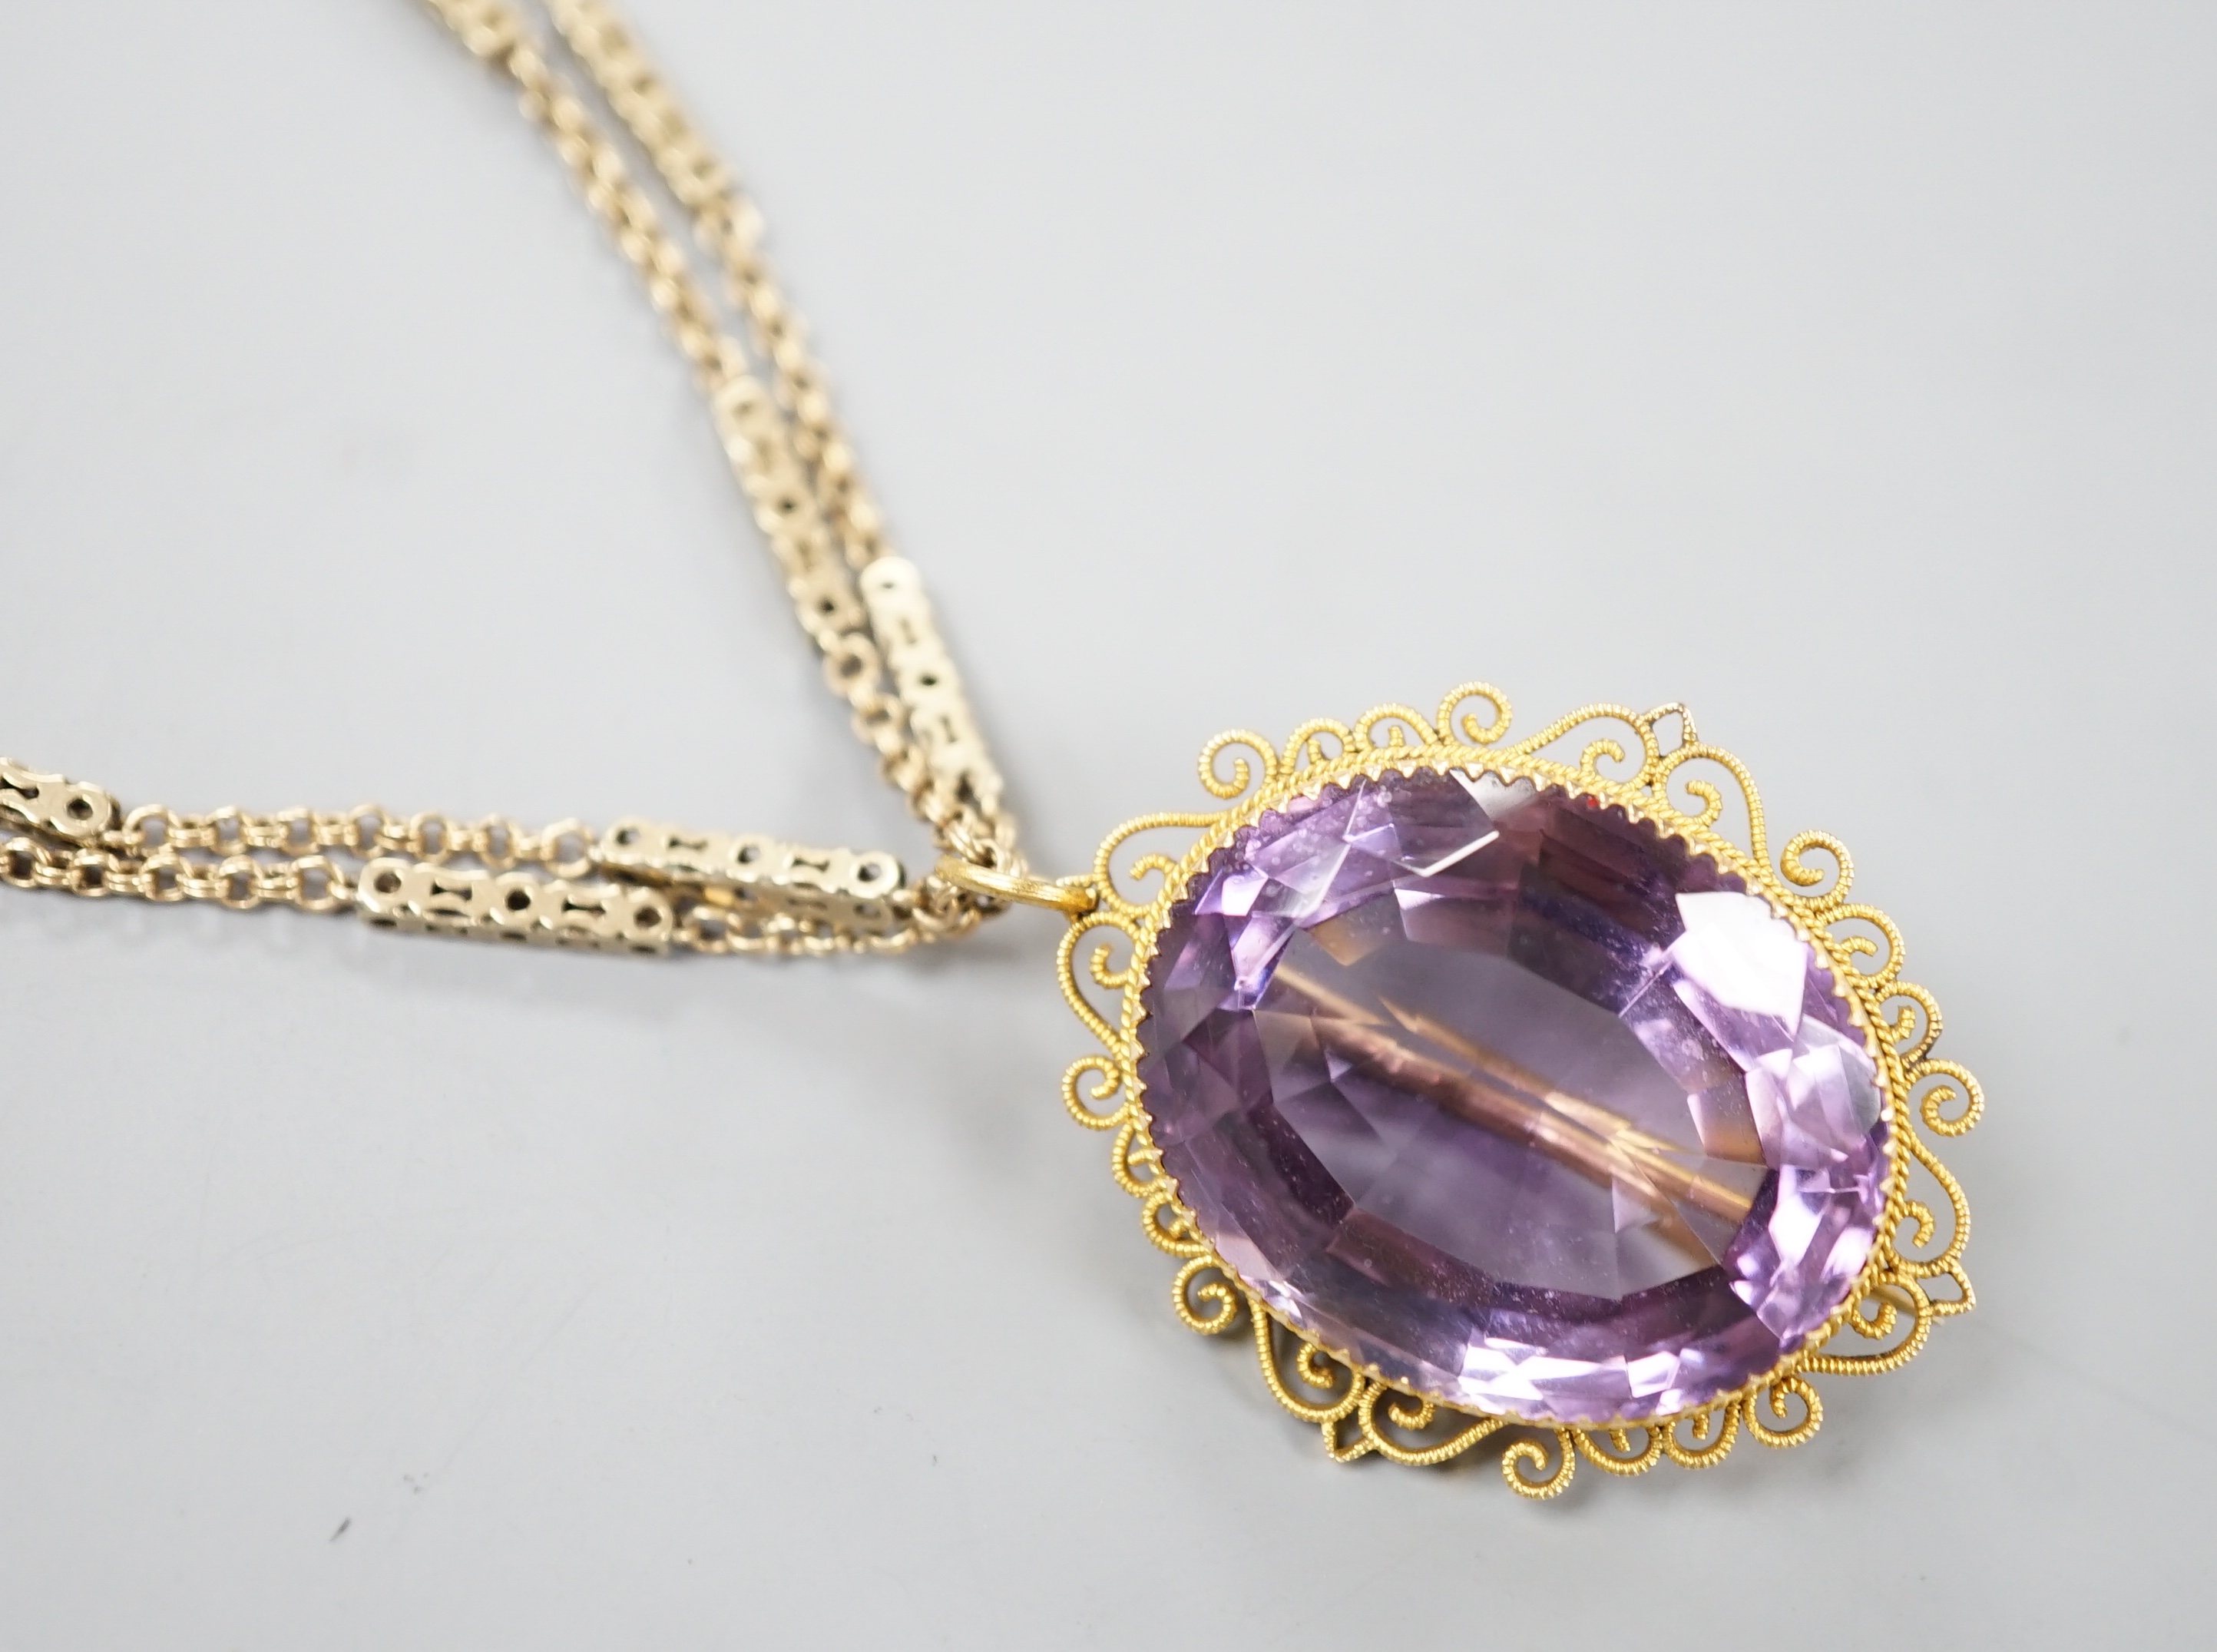 A yellow metal mounted oval cut amethyst pendant brooch, 34mm, gross 13.2 grams, on a Victorian pinchbeck guard chain, 70cm.